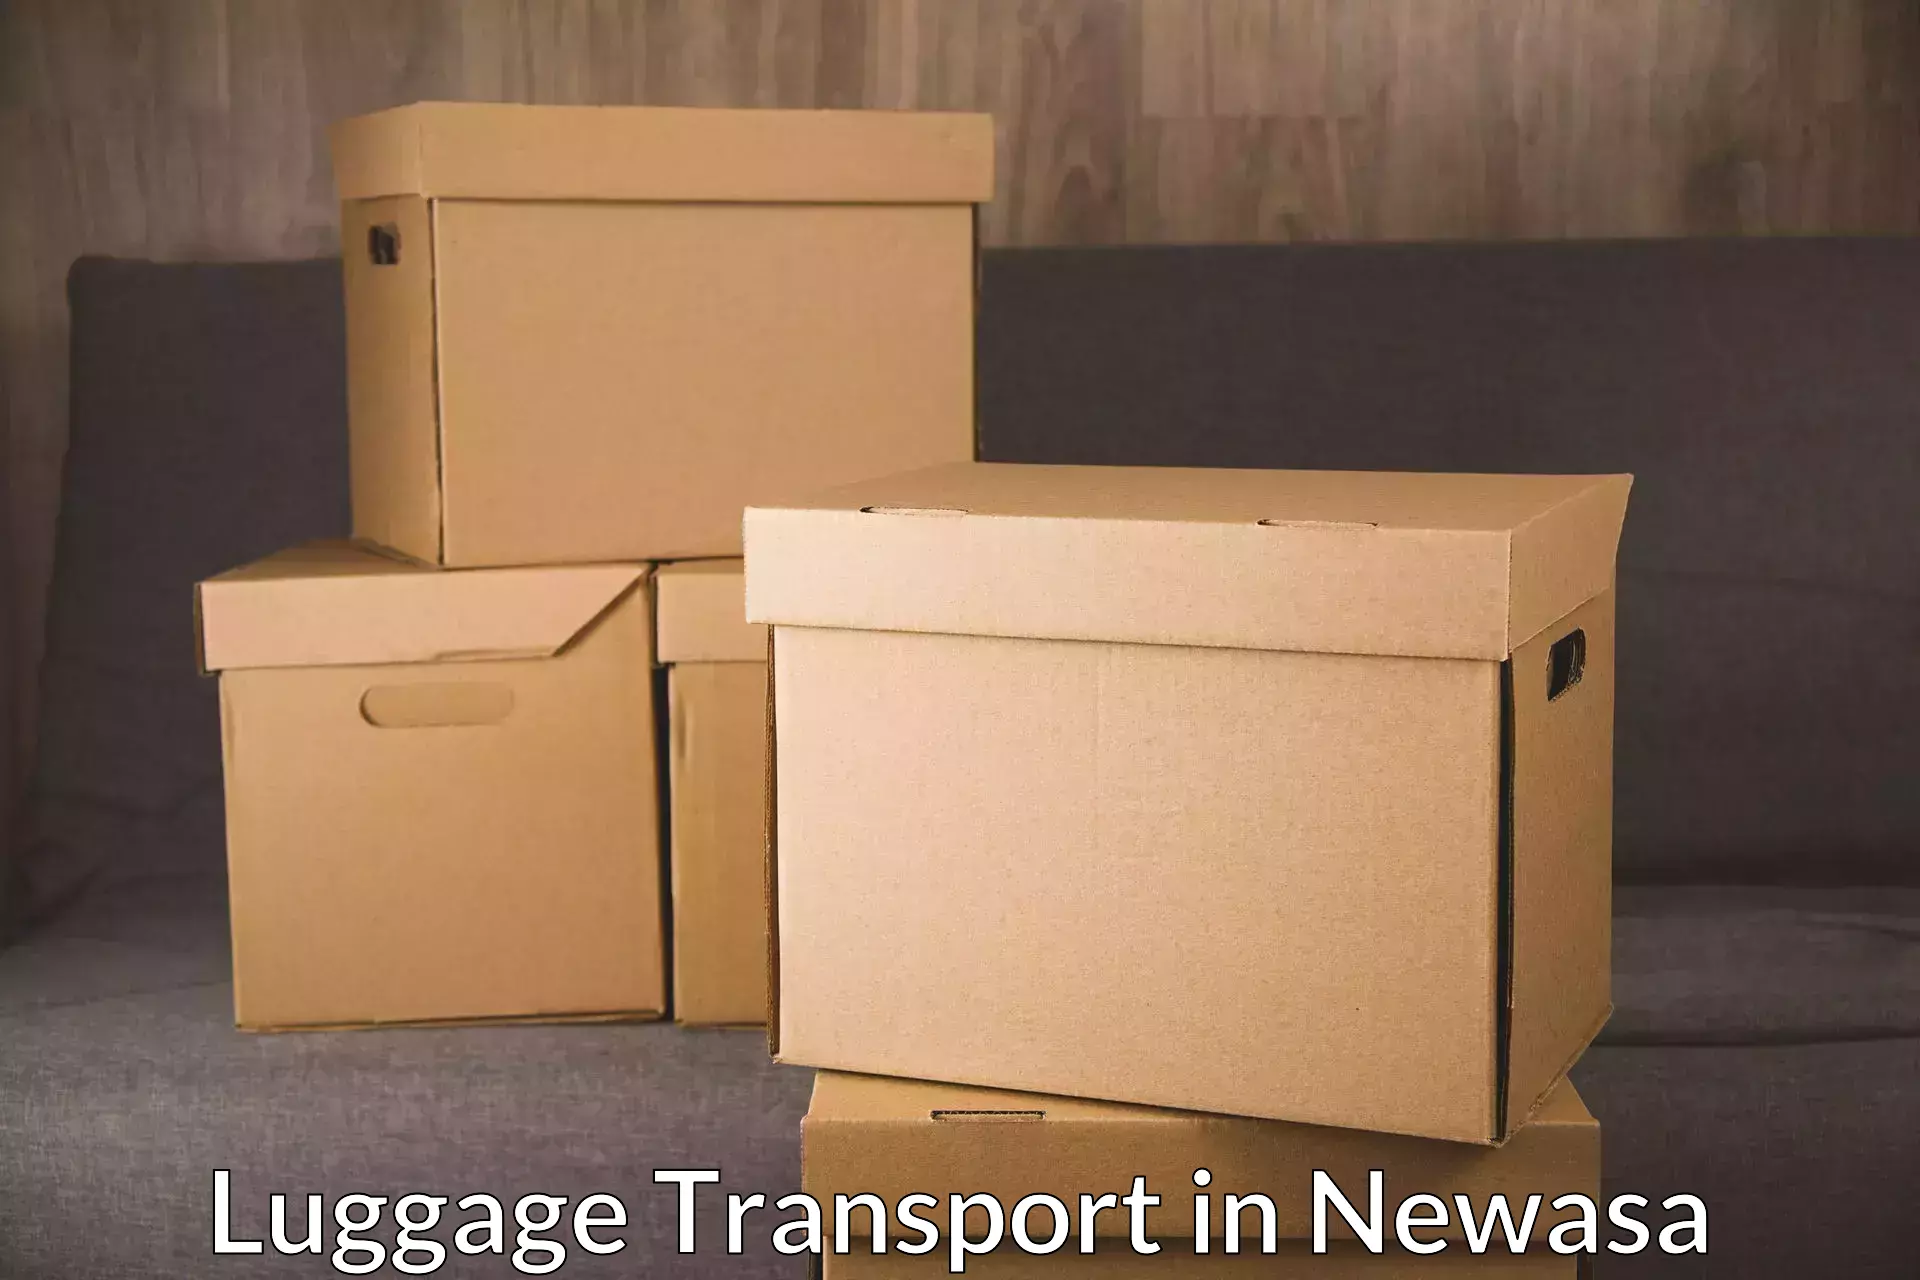 Student luggage transport in Newasa